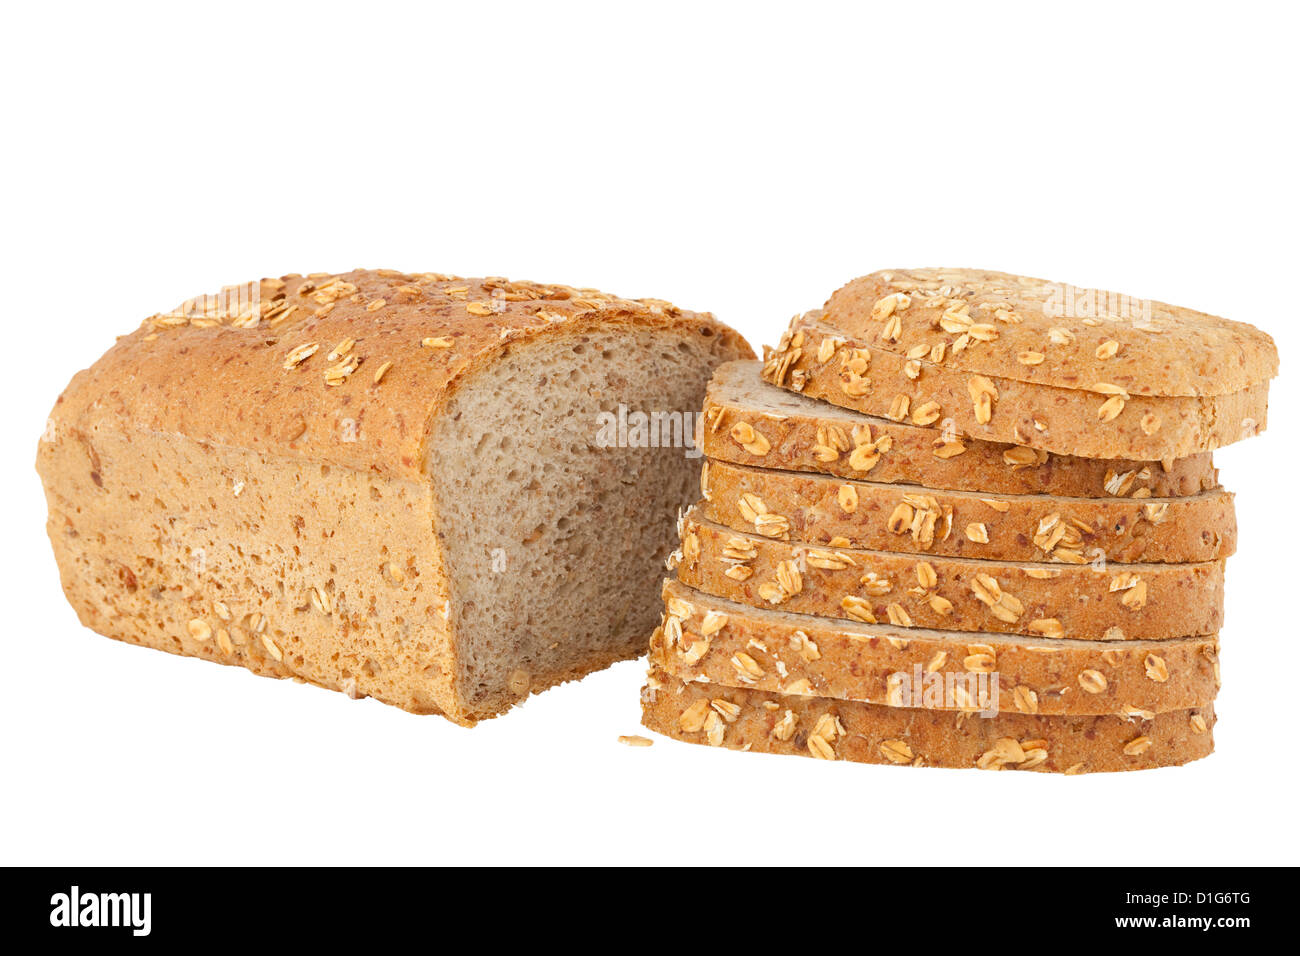 whole bread and slice of bread on white background Stock Photo